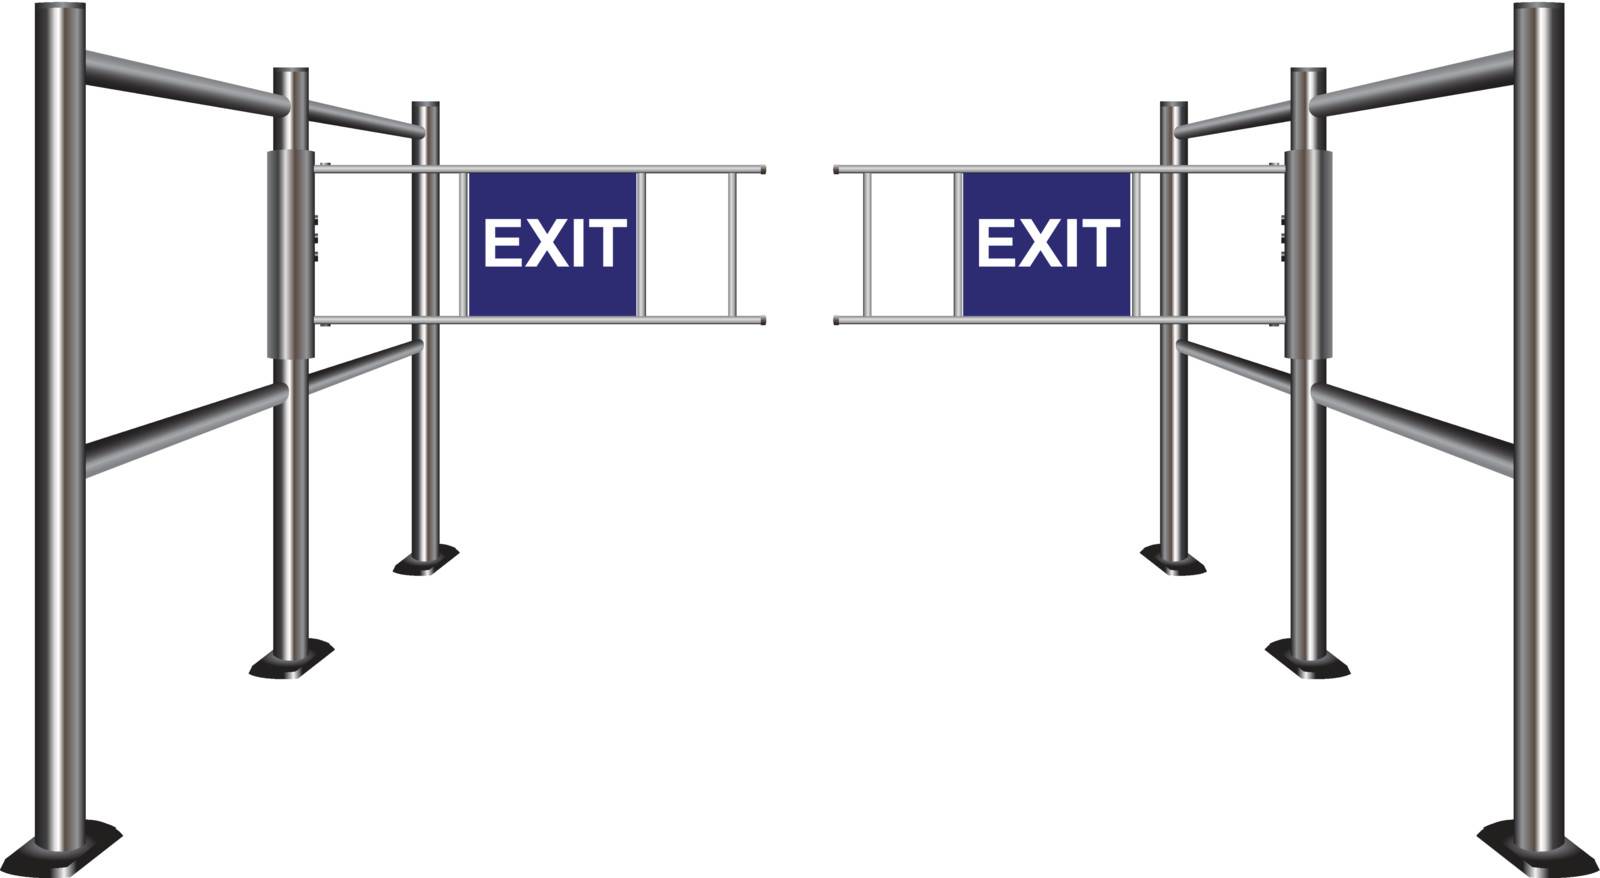 Turnstile pointing exit by VIPDesignUSA